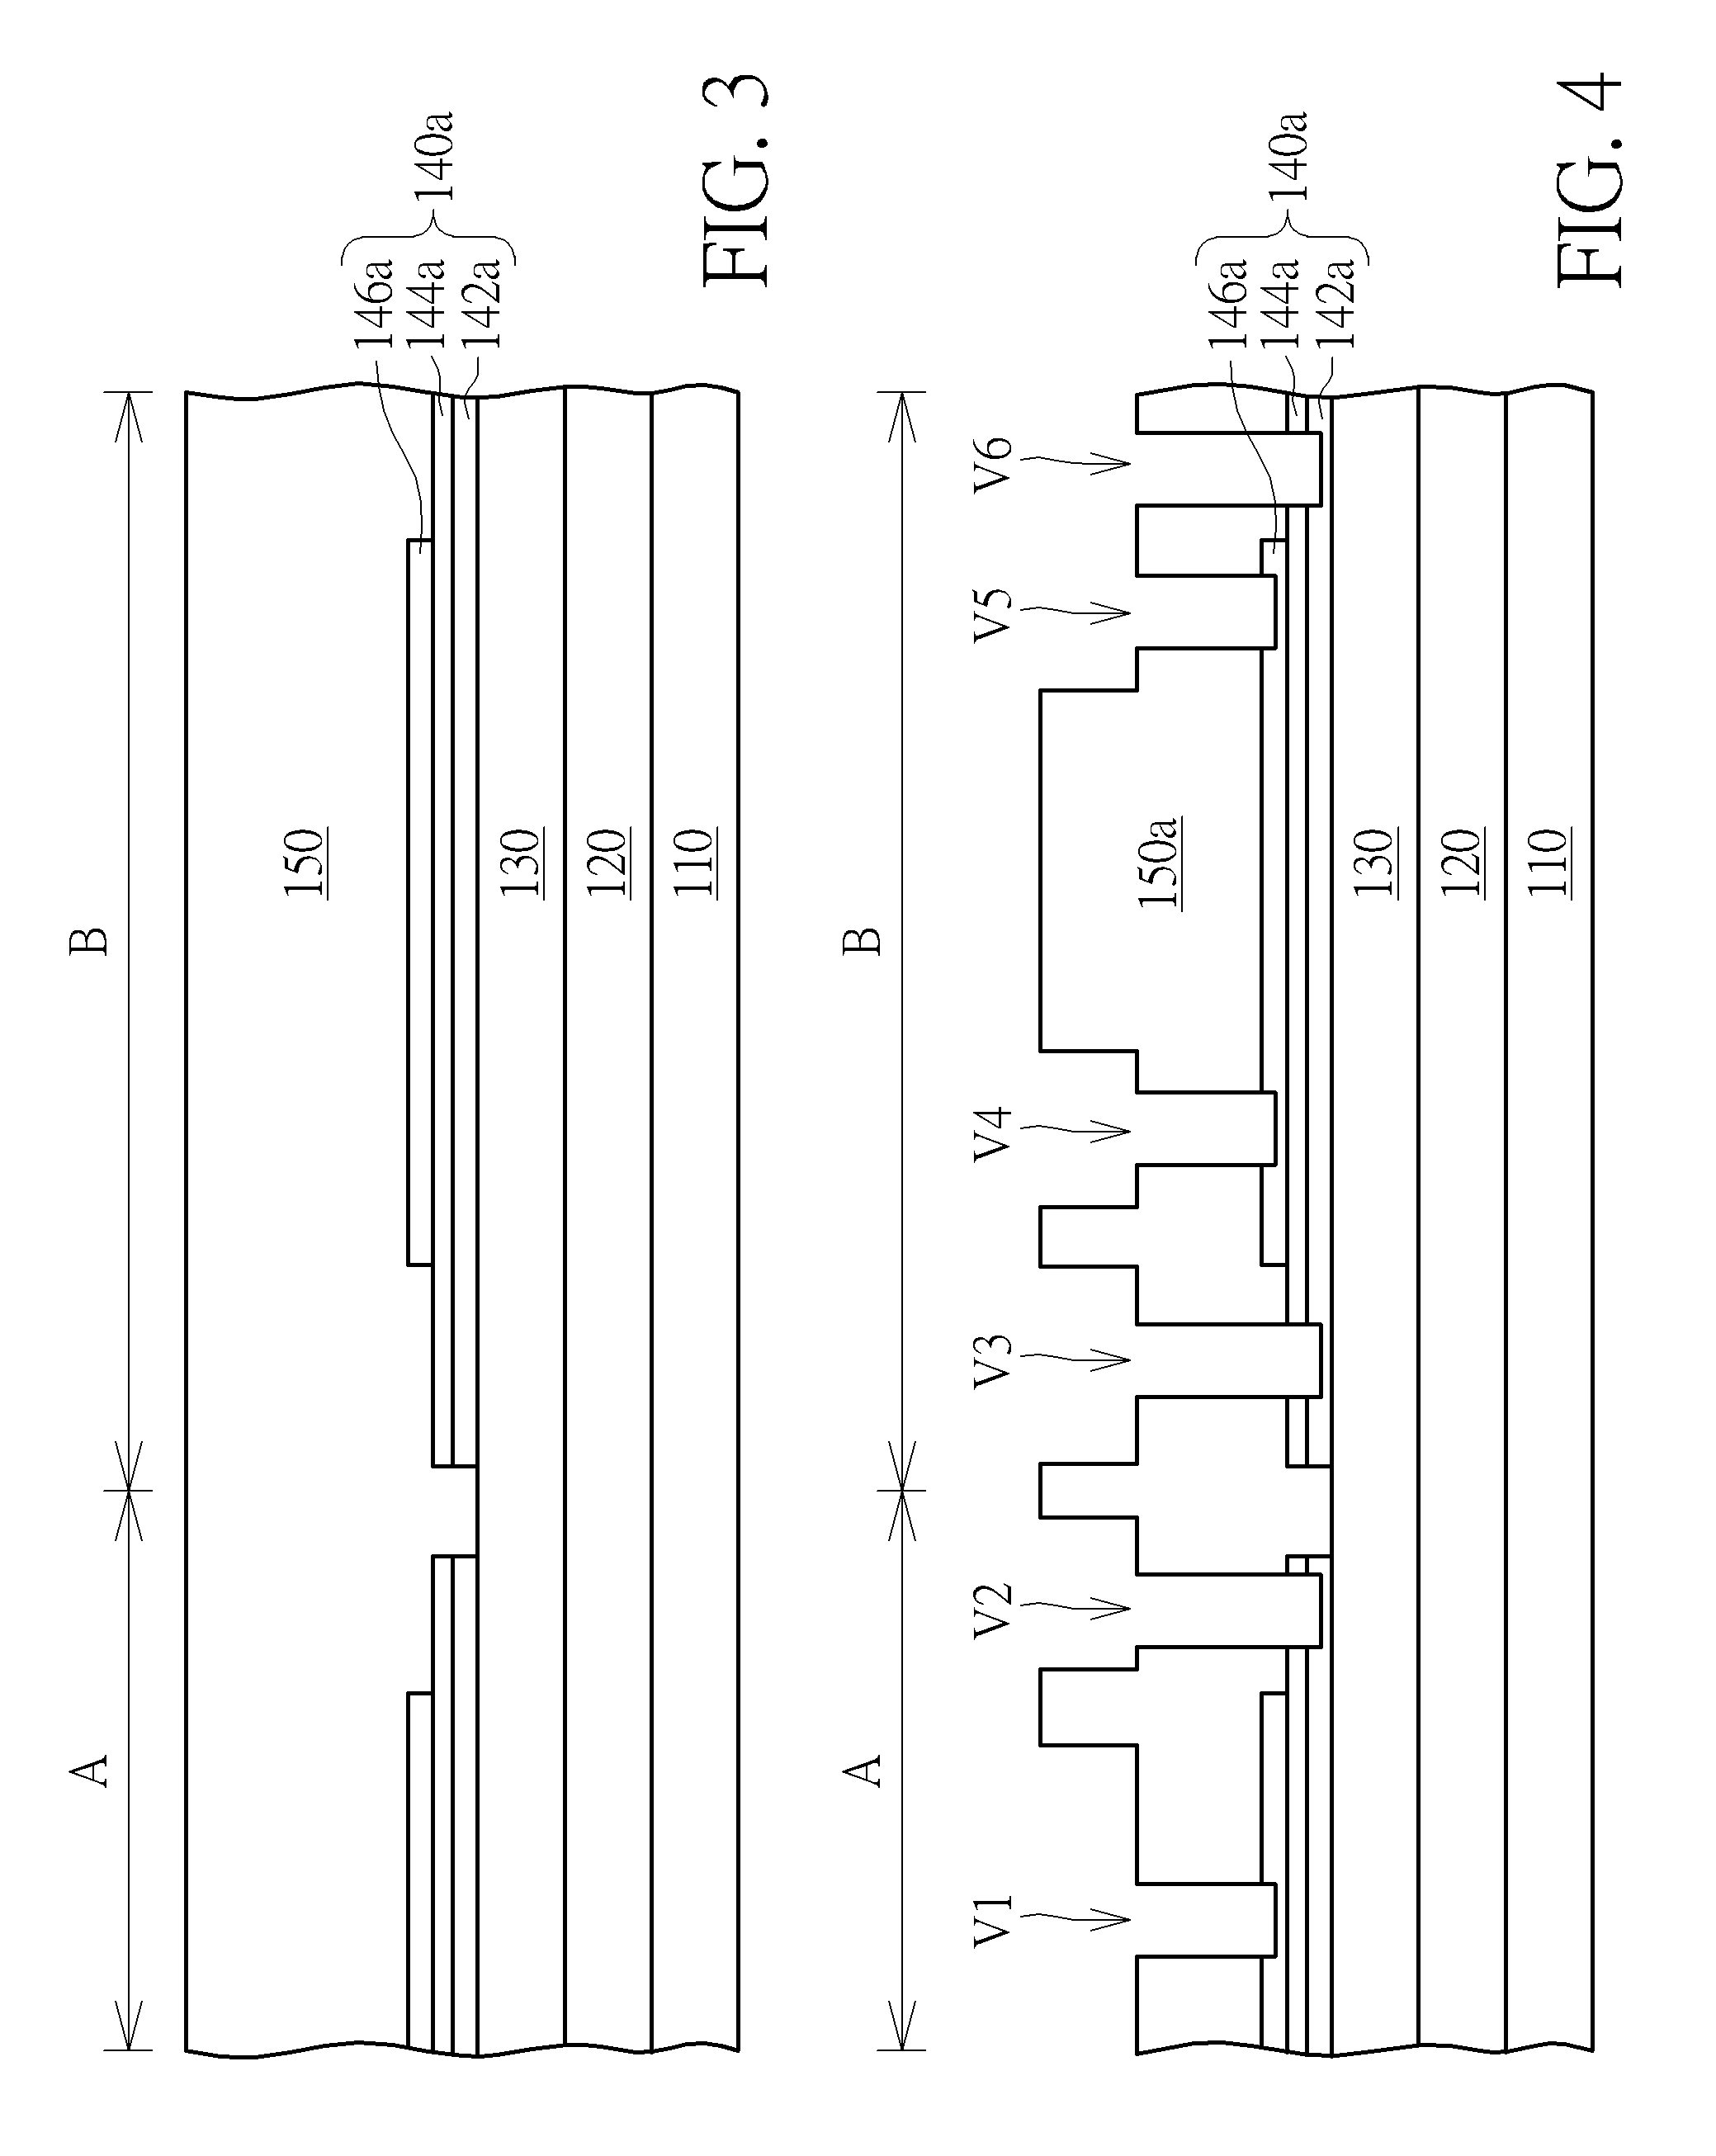 Integrated circuit and method of forming integrated circuit